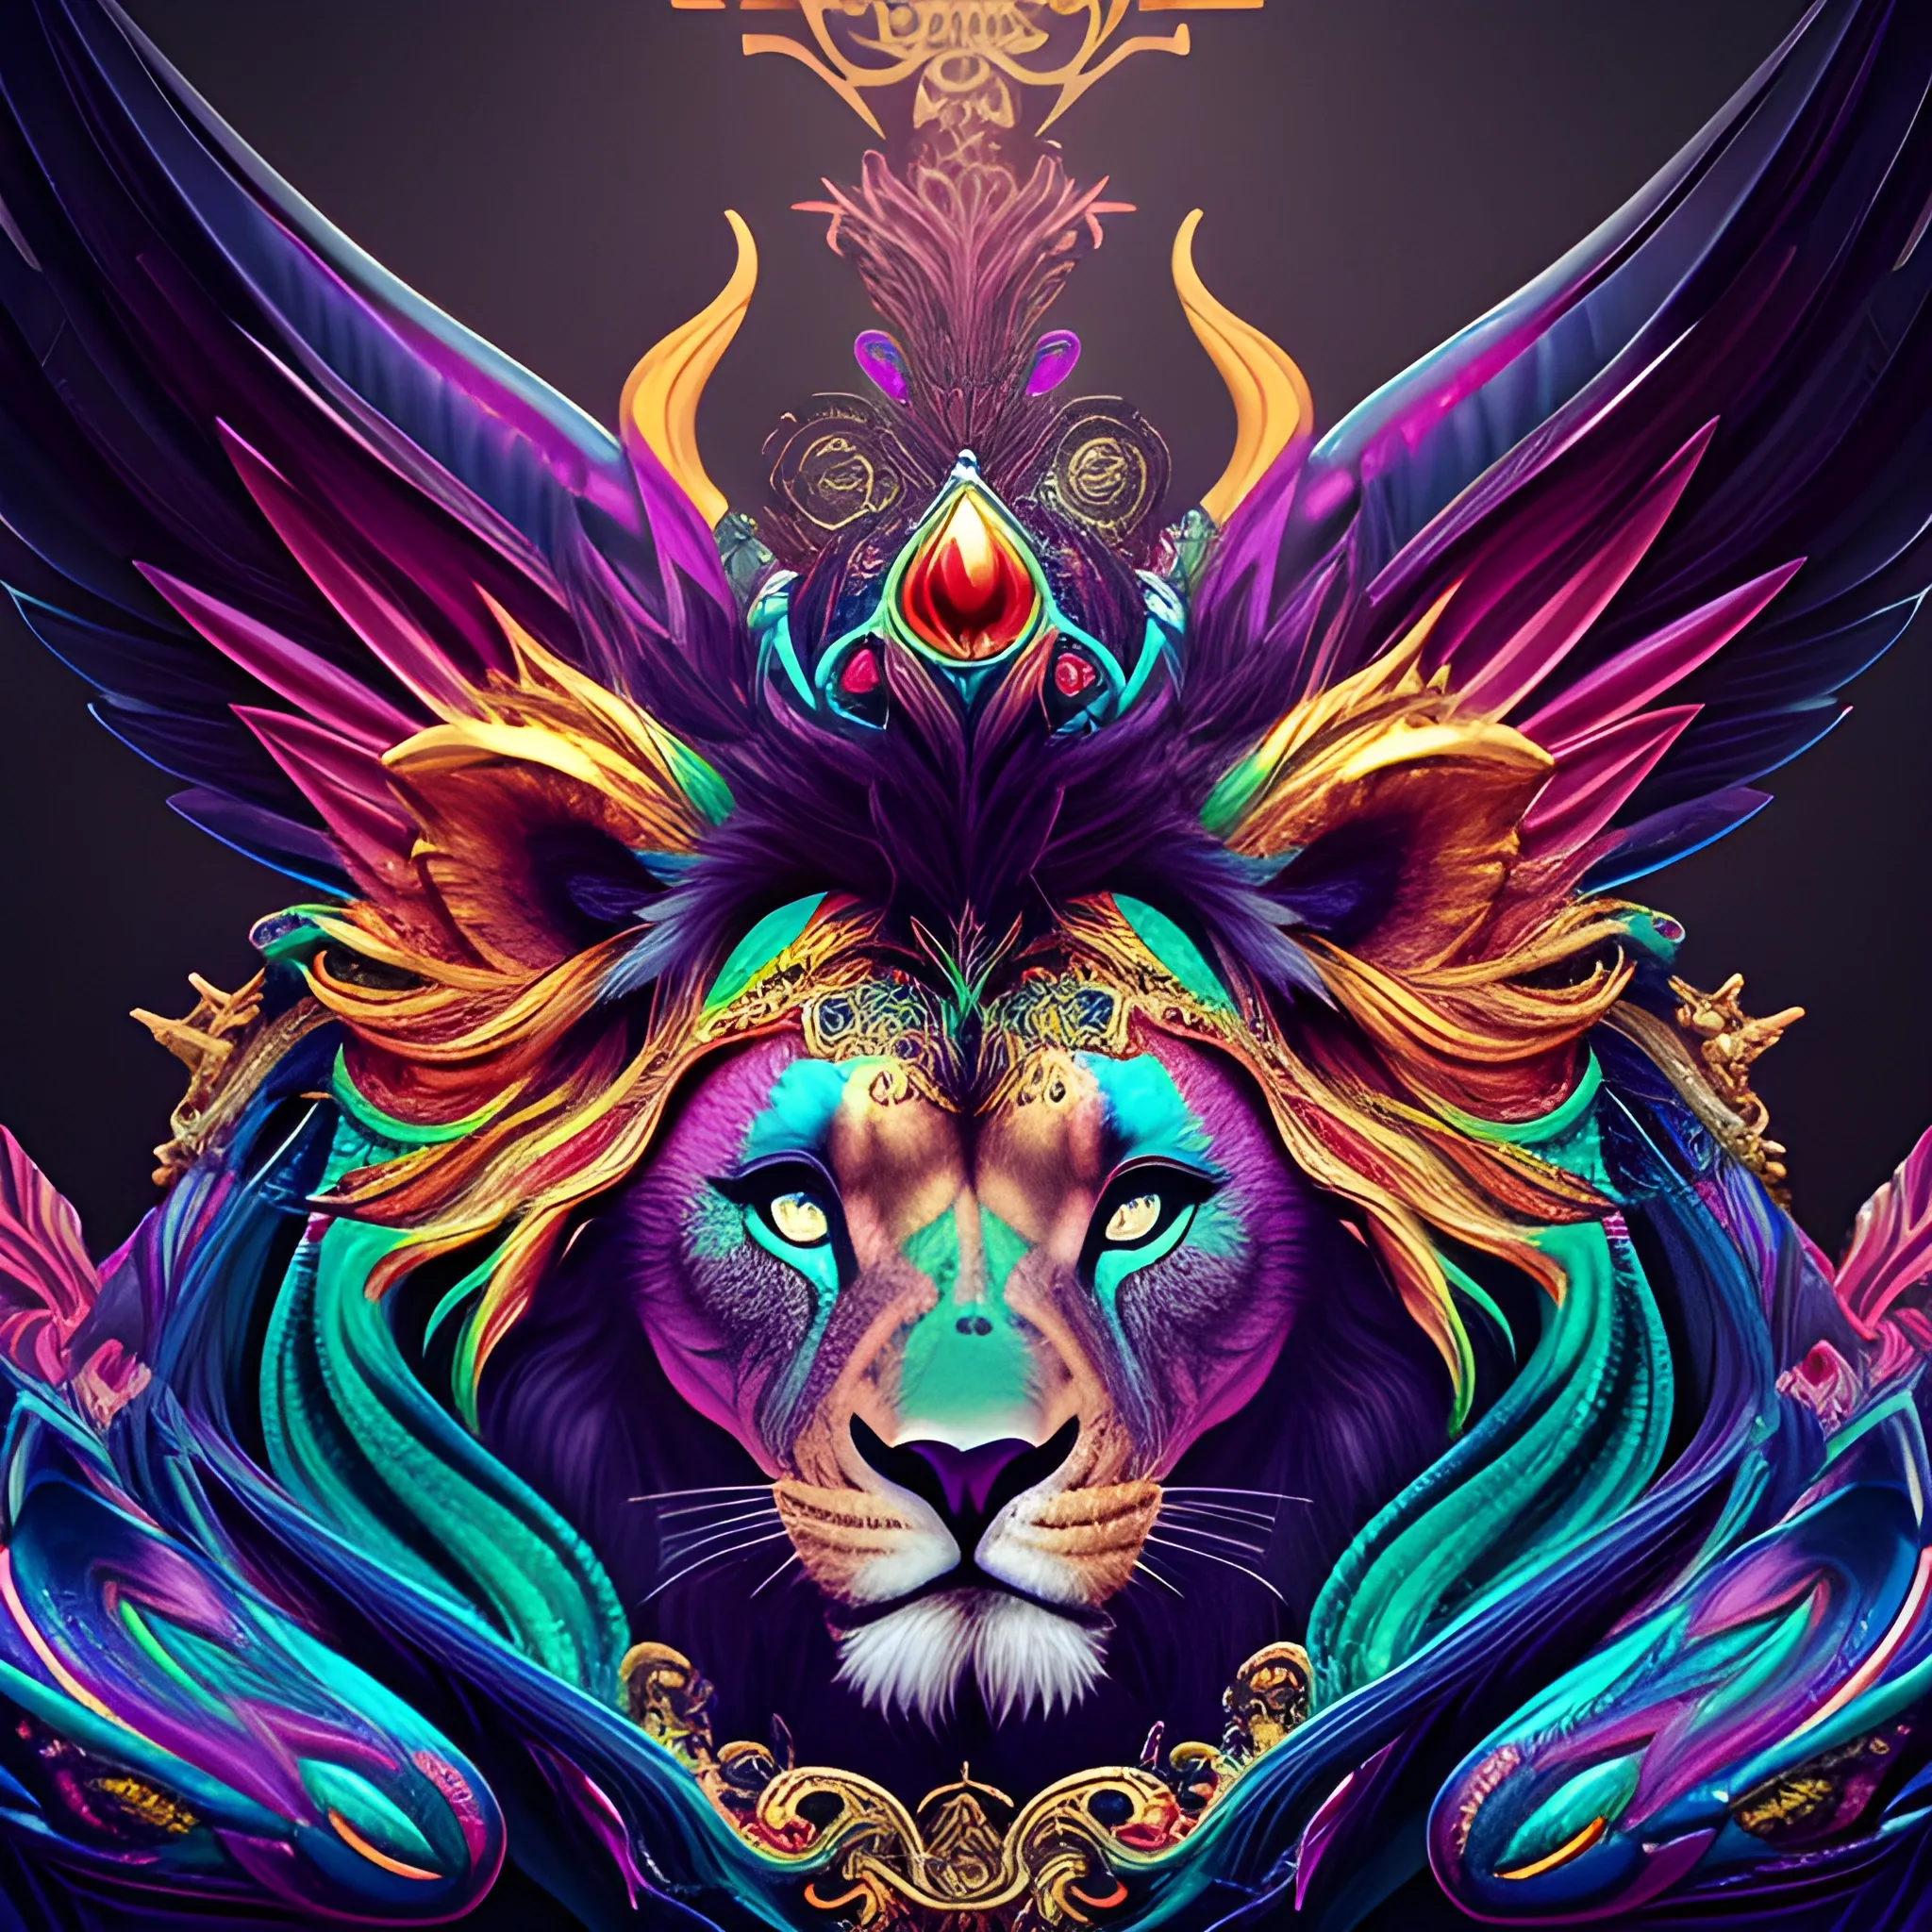 designer, the colorful  Lion head is on a black background, in the style of 8k resolution, colorful gradients, tim shumate, cute and colorful, massurrealism, magipunk,
charming characters, black background, fire psychedelic, cute eyes, dragon wings, bear claws, peacock feathers, filigree laser fractal details, glistening shiny scales, intricate ornate hypermaximalist sharp focus, dramatic lighting, highly detailed and intricate, hyper maximalist, ornate, photographic style, luxury, elite, haunting matte painting, cinematic, Trippy, 3D